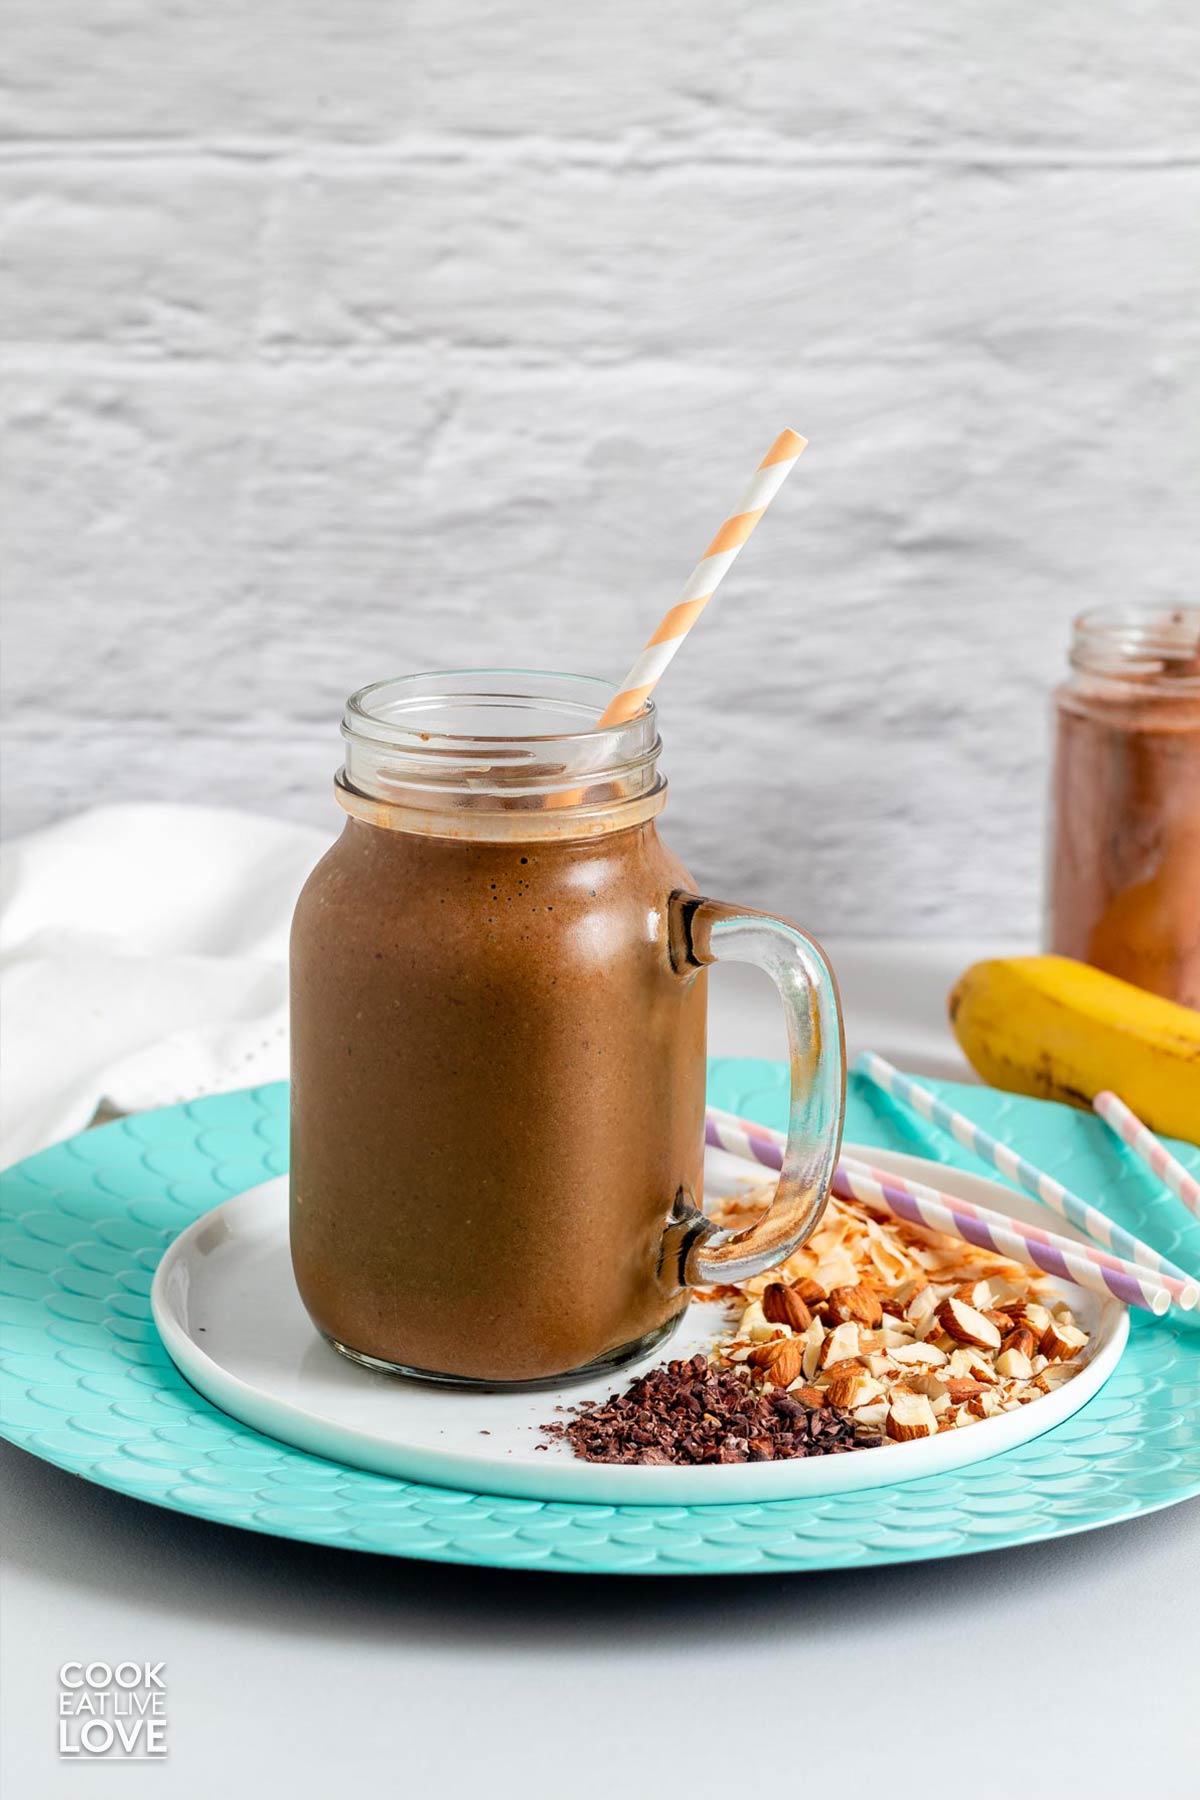 Pitcher of chocolate smoothie with bananas and cacao powder